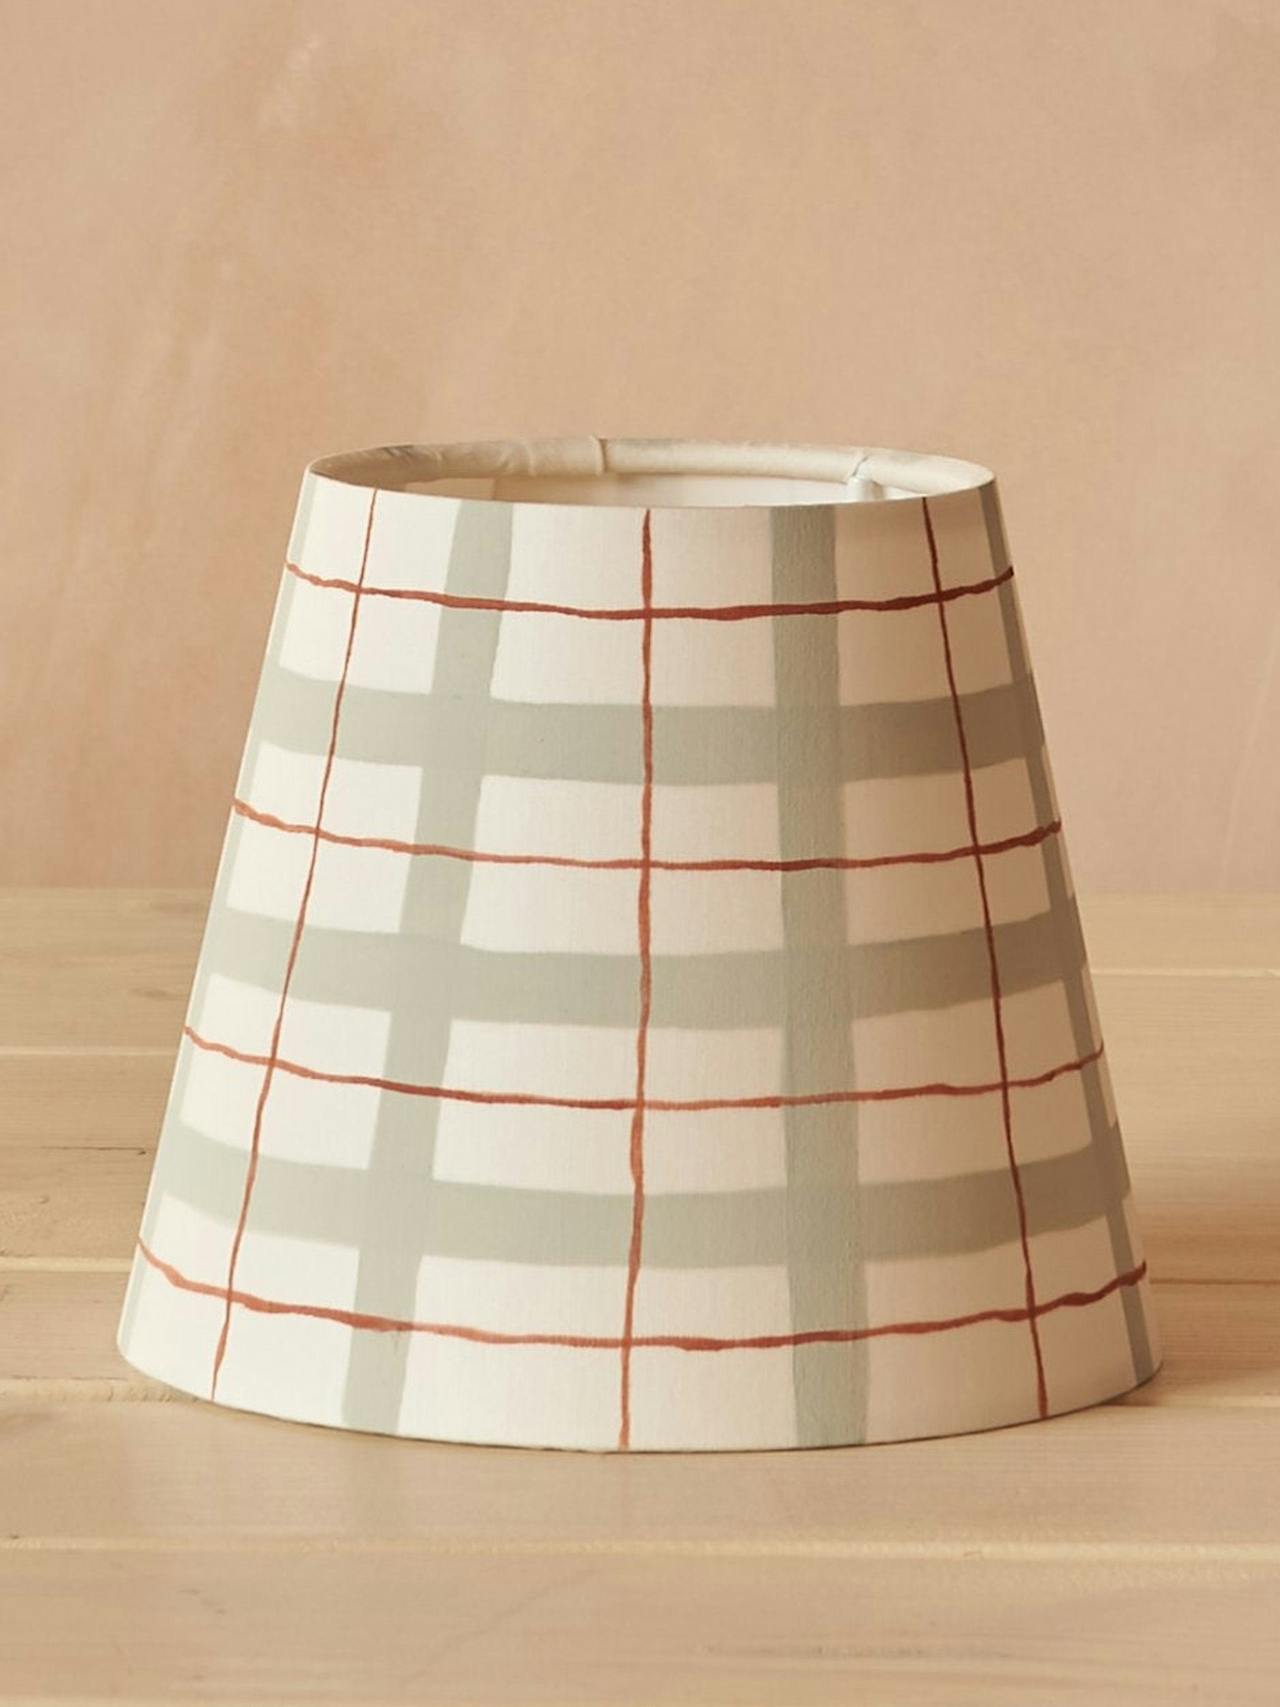 Pale blue gingham lampshade